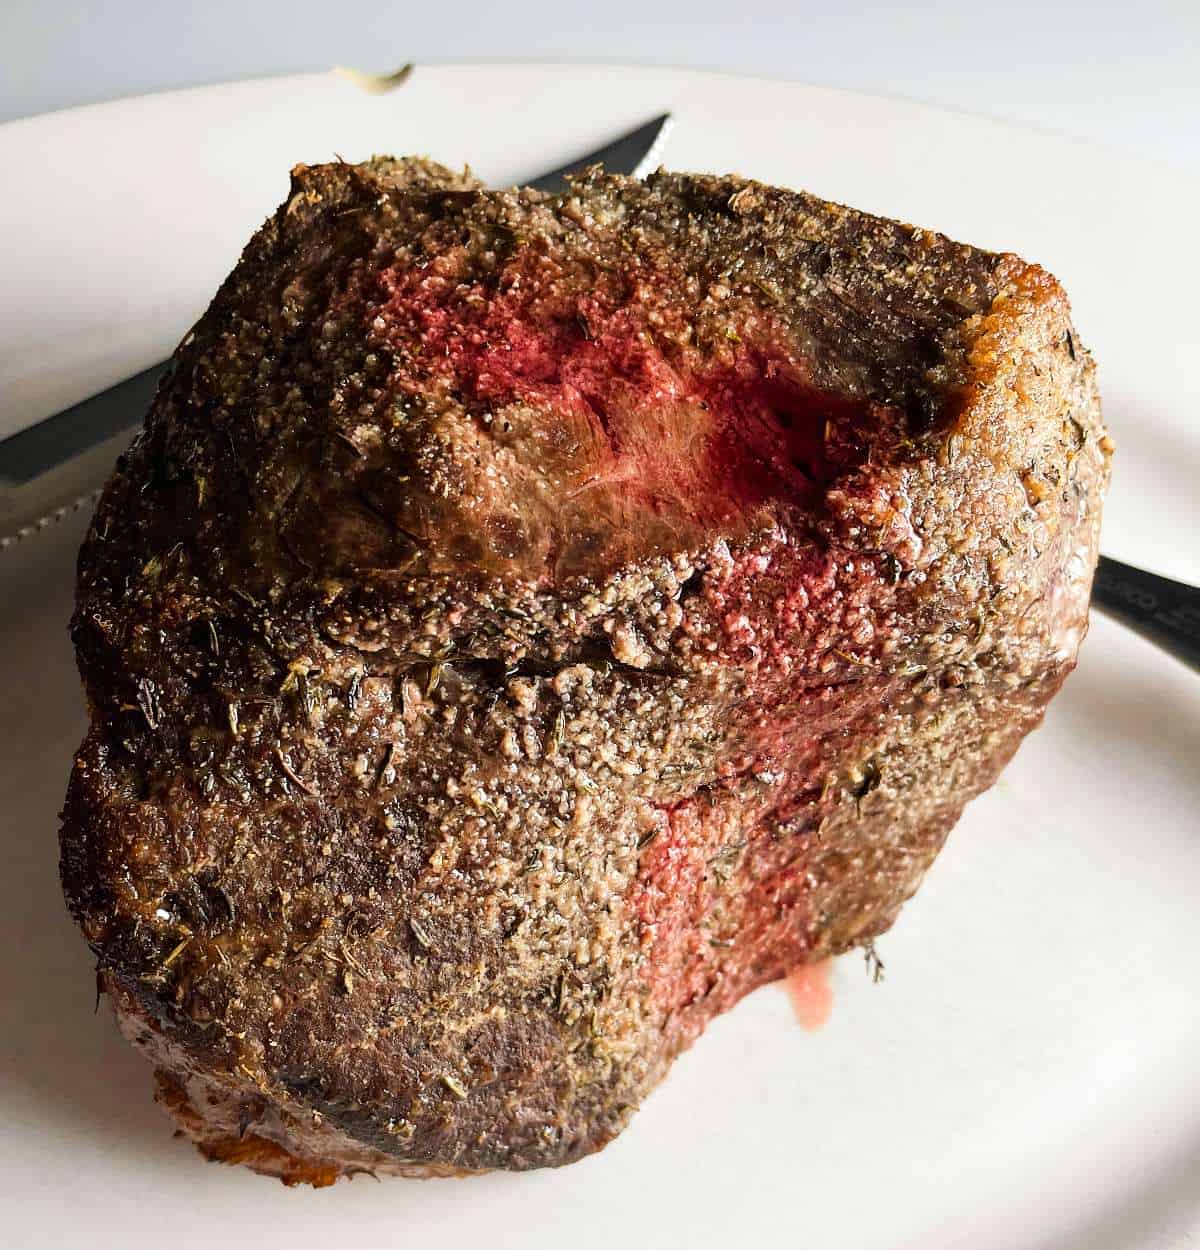 A cooked top round roast beef on a white platter, prior to slicing.